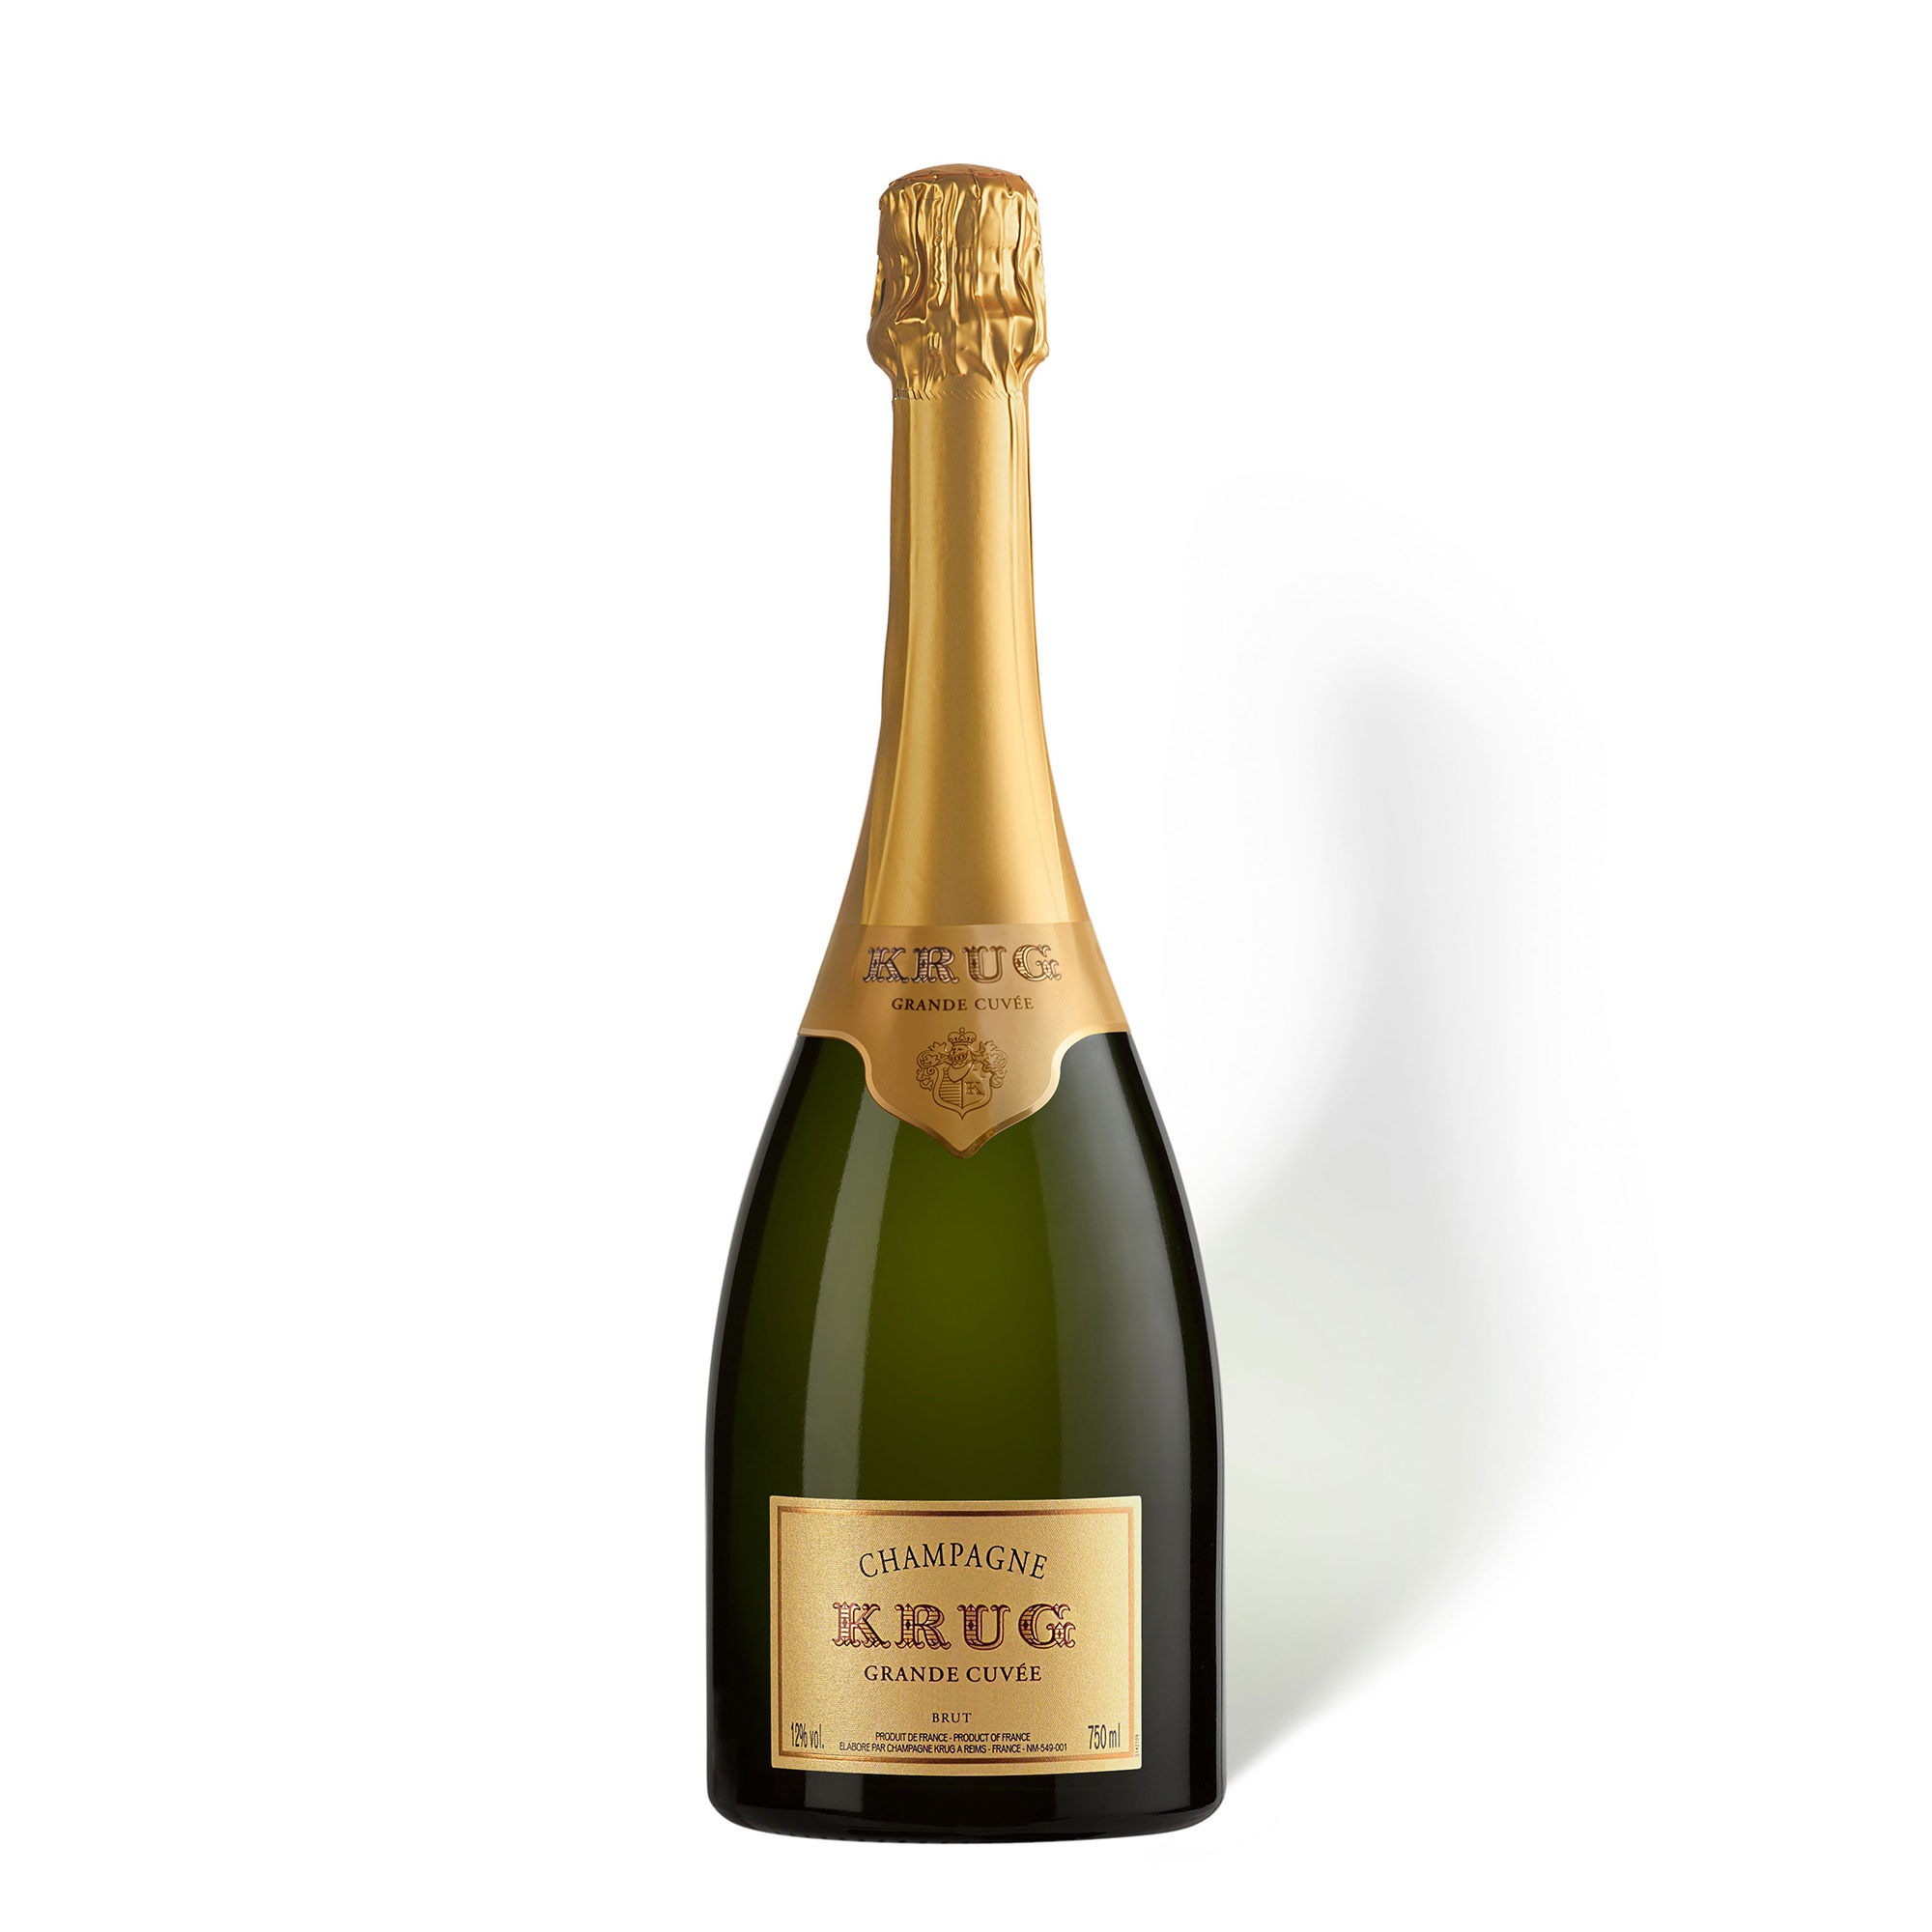 Krug Grande Cuvee Editions Champagne NV 75cl Great Price and Home Delivery